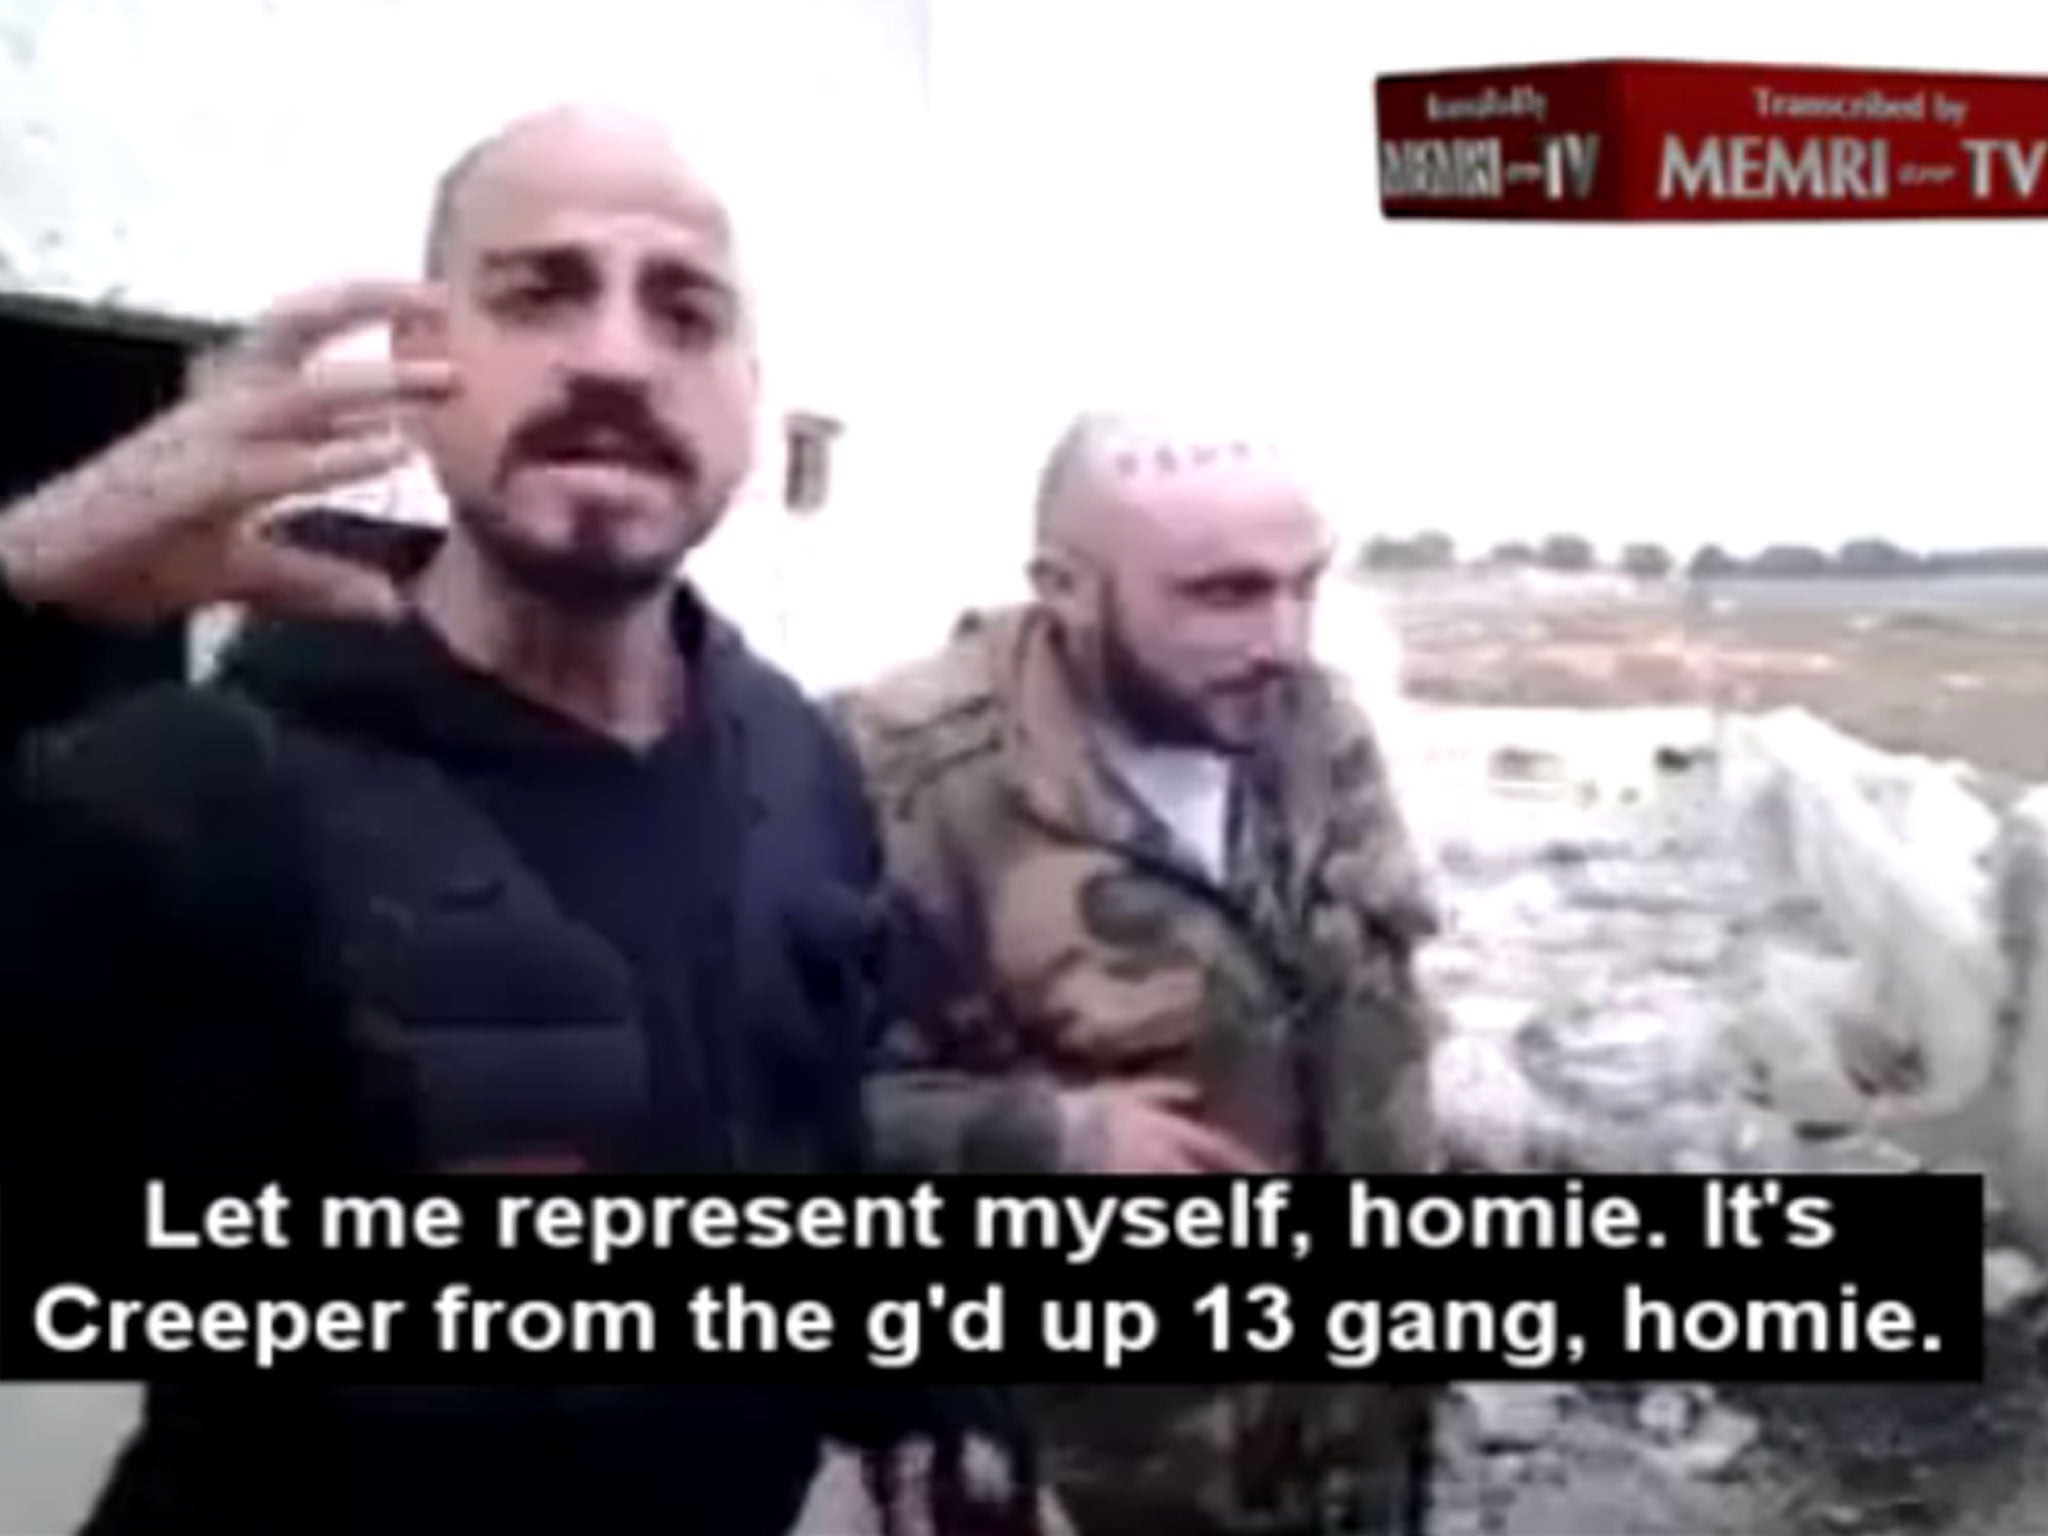 A still from a video posted by MEMRI TV allegedly showing LA gang members fighting for Bashar Al-Assad in Syria